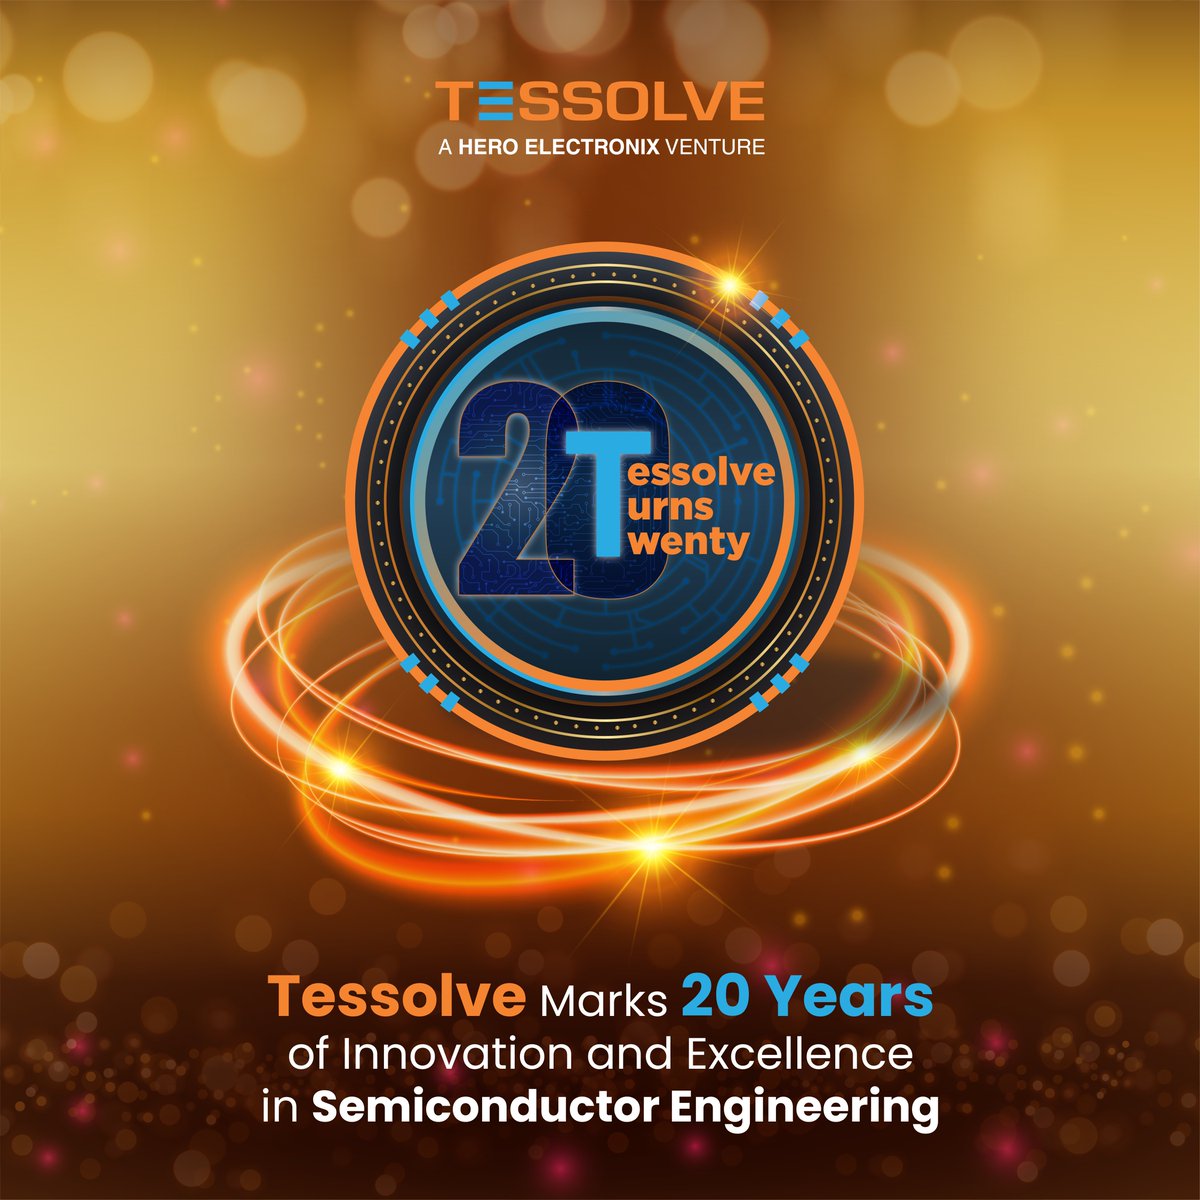 Cheers to 20 incredible years of innovation, dedication, and engineering excellence!
Celebrating Tessolve's 2 decades of shaping the future in Silicon and Systems engineering. Here's to many more milestones ahead!
#TessolveAnniversary #20YearsOfExcellence #TessolveTurns20